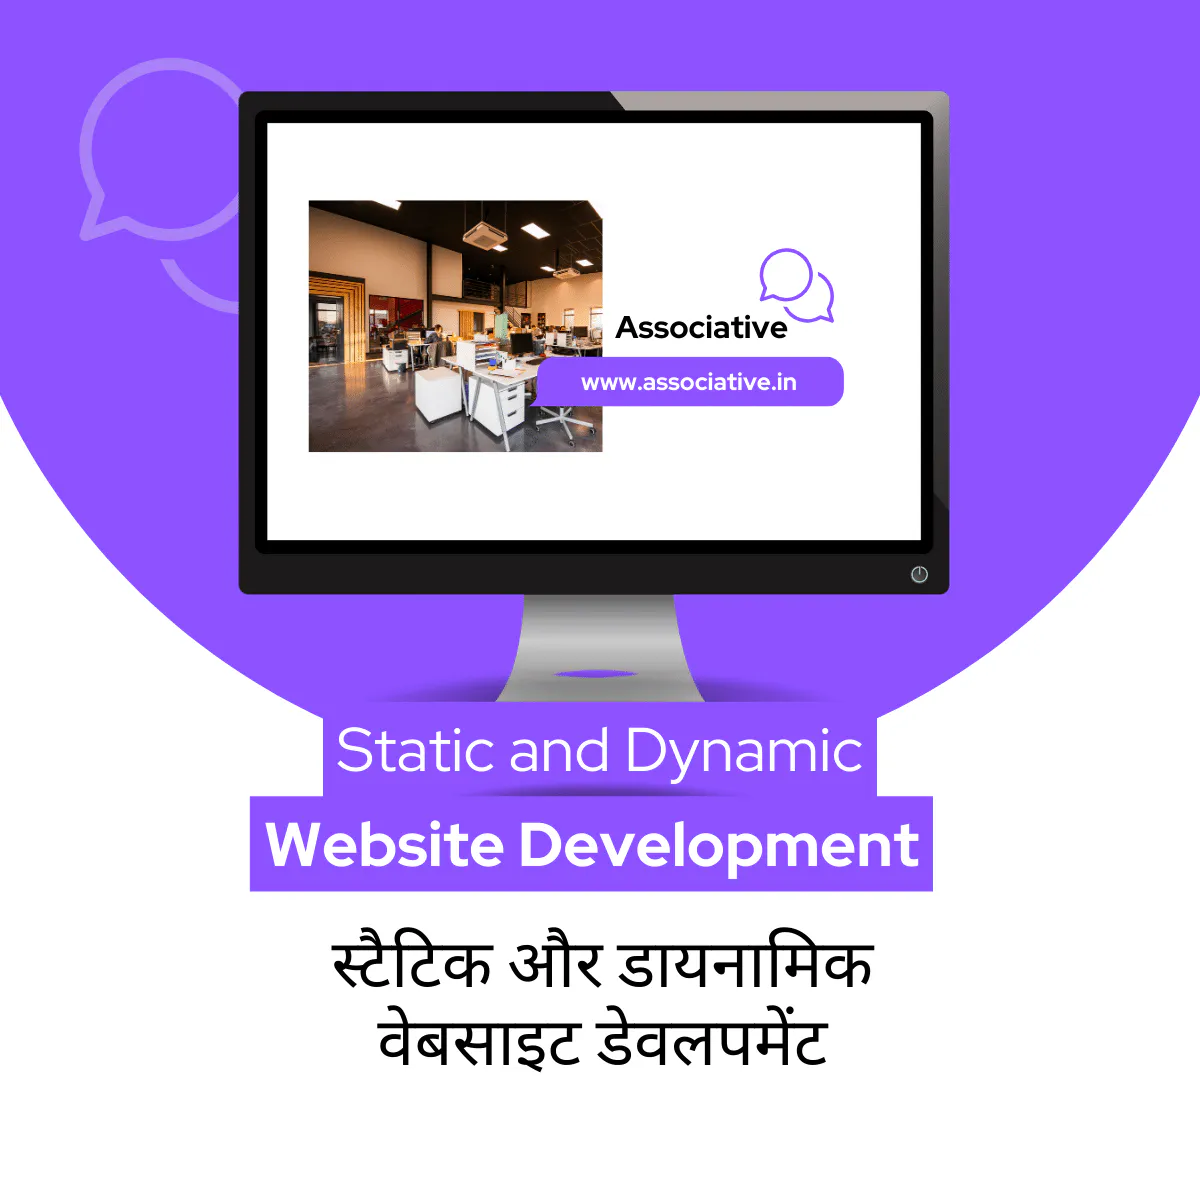 Static and Dynamic Website Development